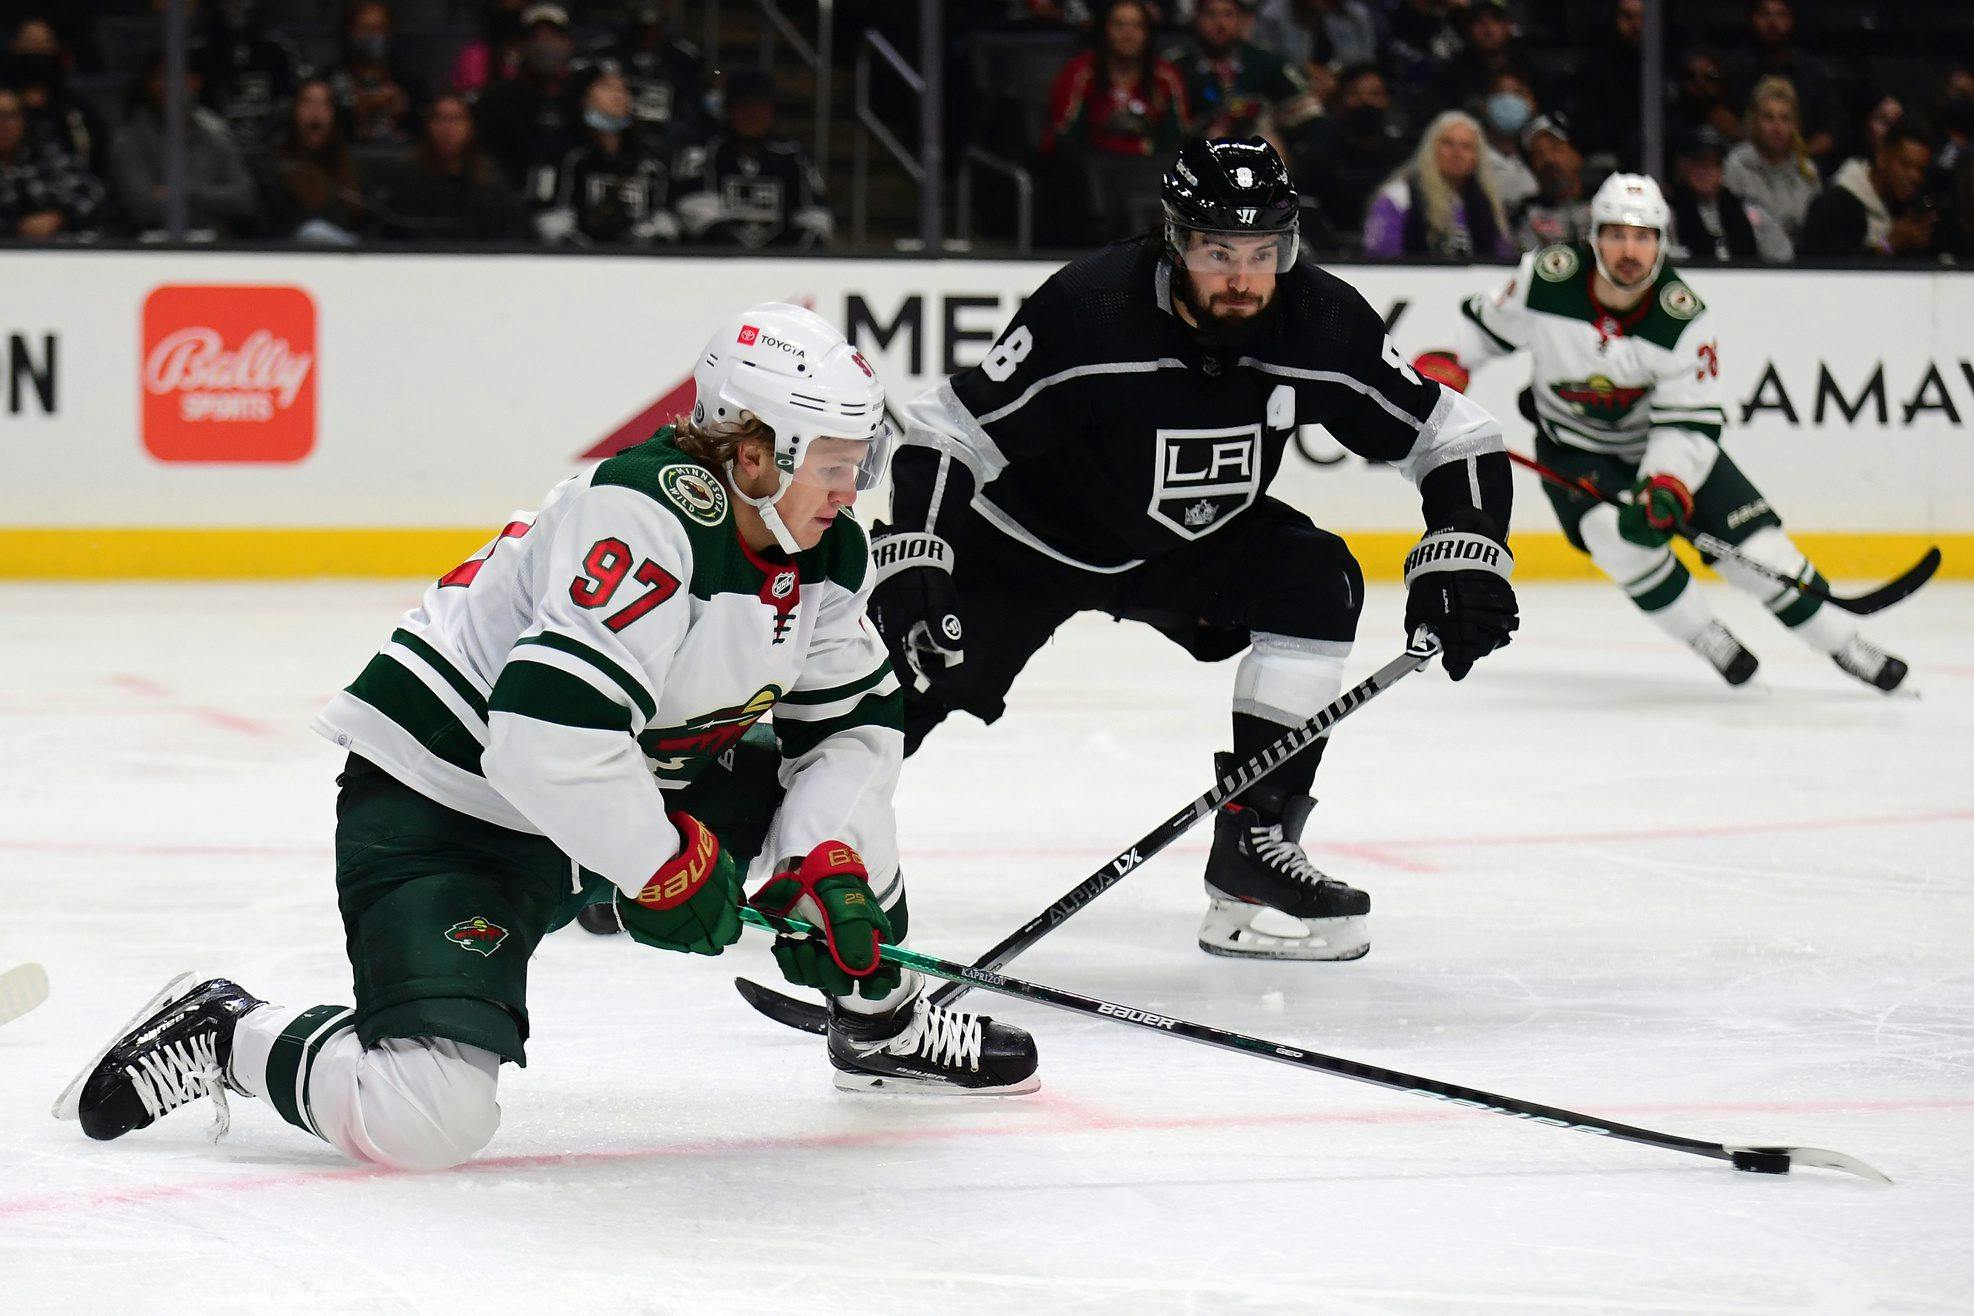 Kirill Kaprizov fined $5,000 after high-sticking match penalty against Drew Doughty